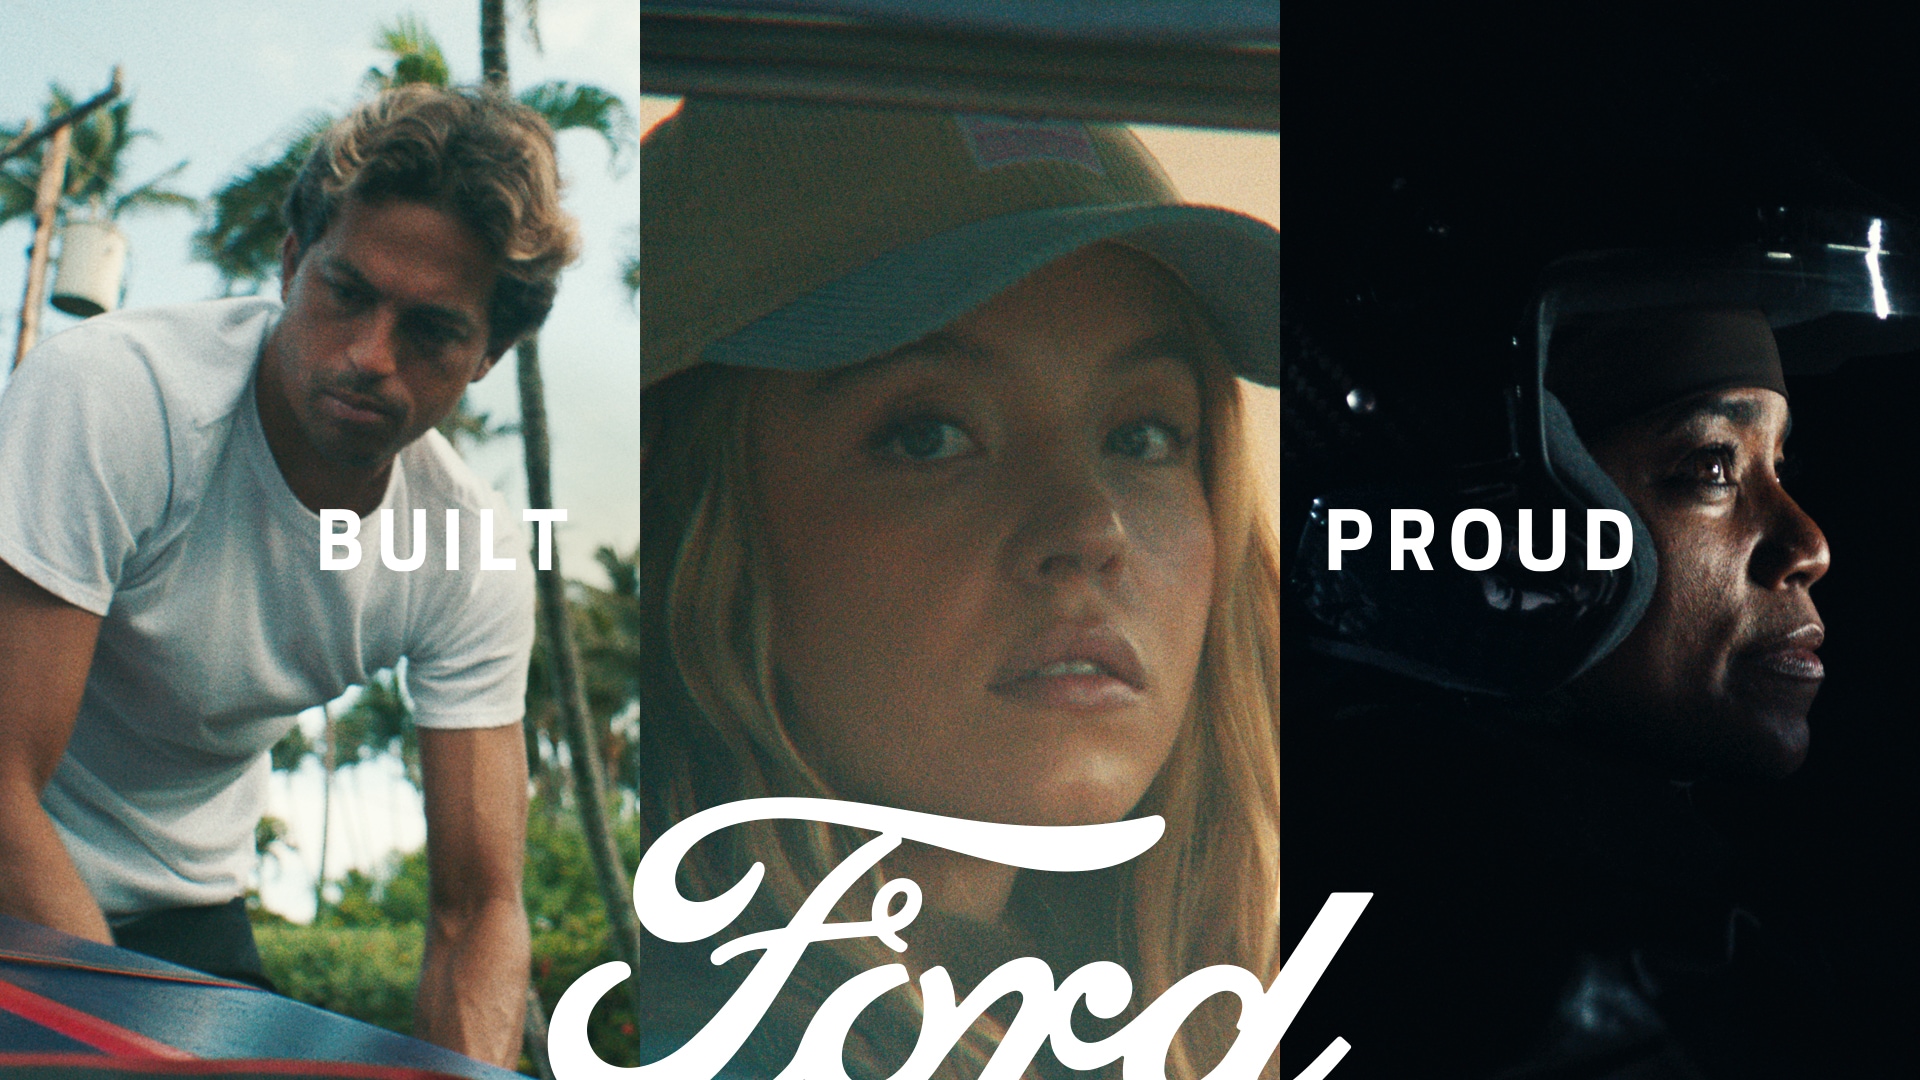 New Ford 'Built Ford Proud' Campaign Celebrates the Next Generation of  Drivers Alongside Actor Sydney Sweeney, Stunt Driver Dee Bryant, and  Professional Surfer Kai Lenny